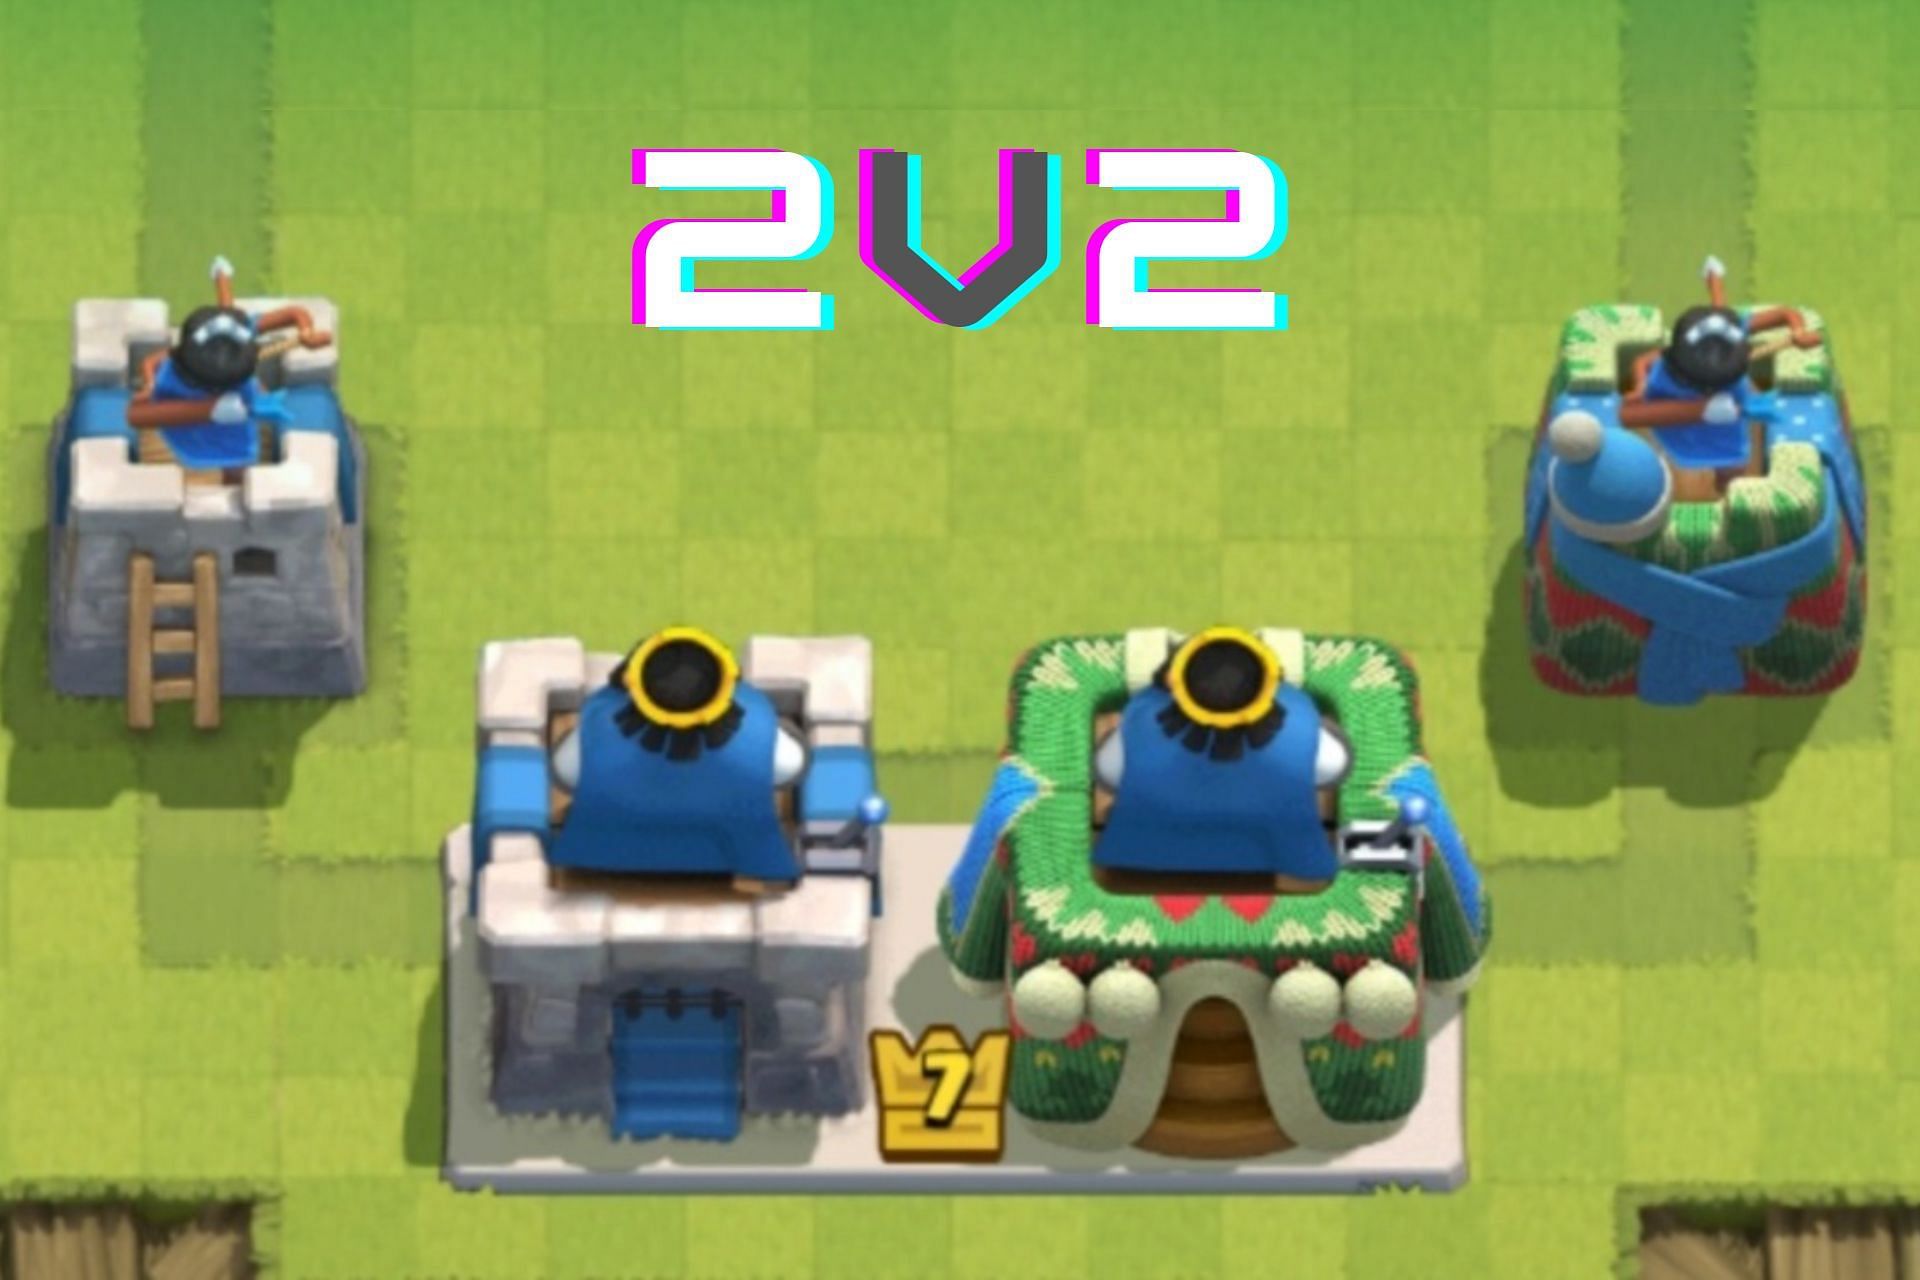 How to play 2v2 in Clash Royale